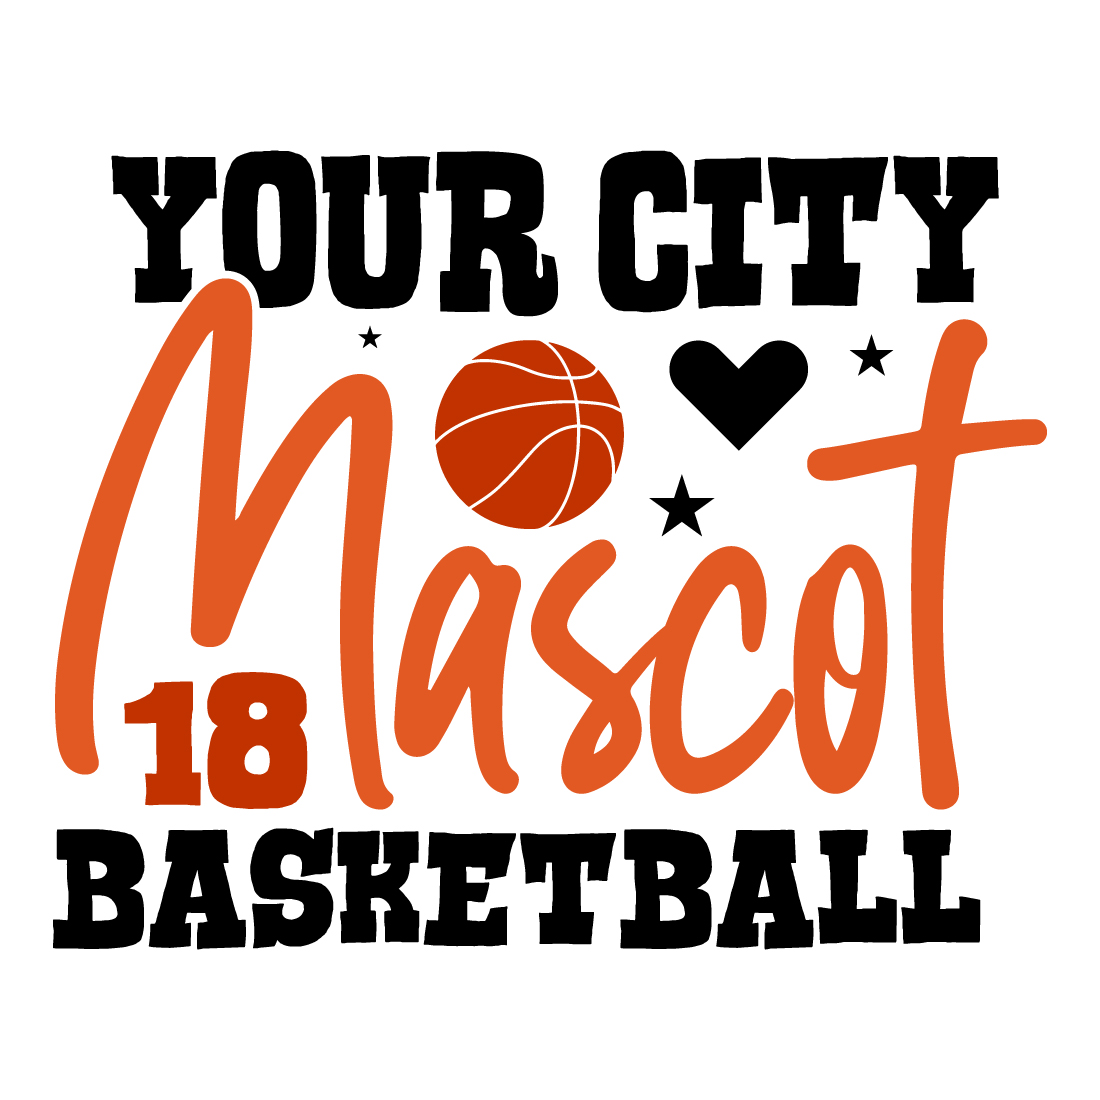 Your City Mascot 18 Basketball cover image.